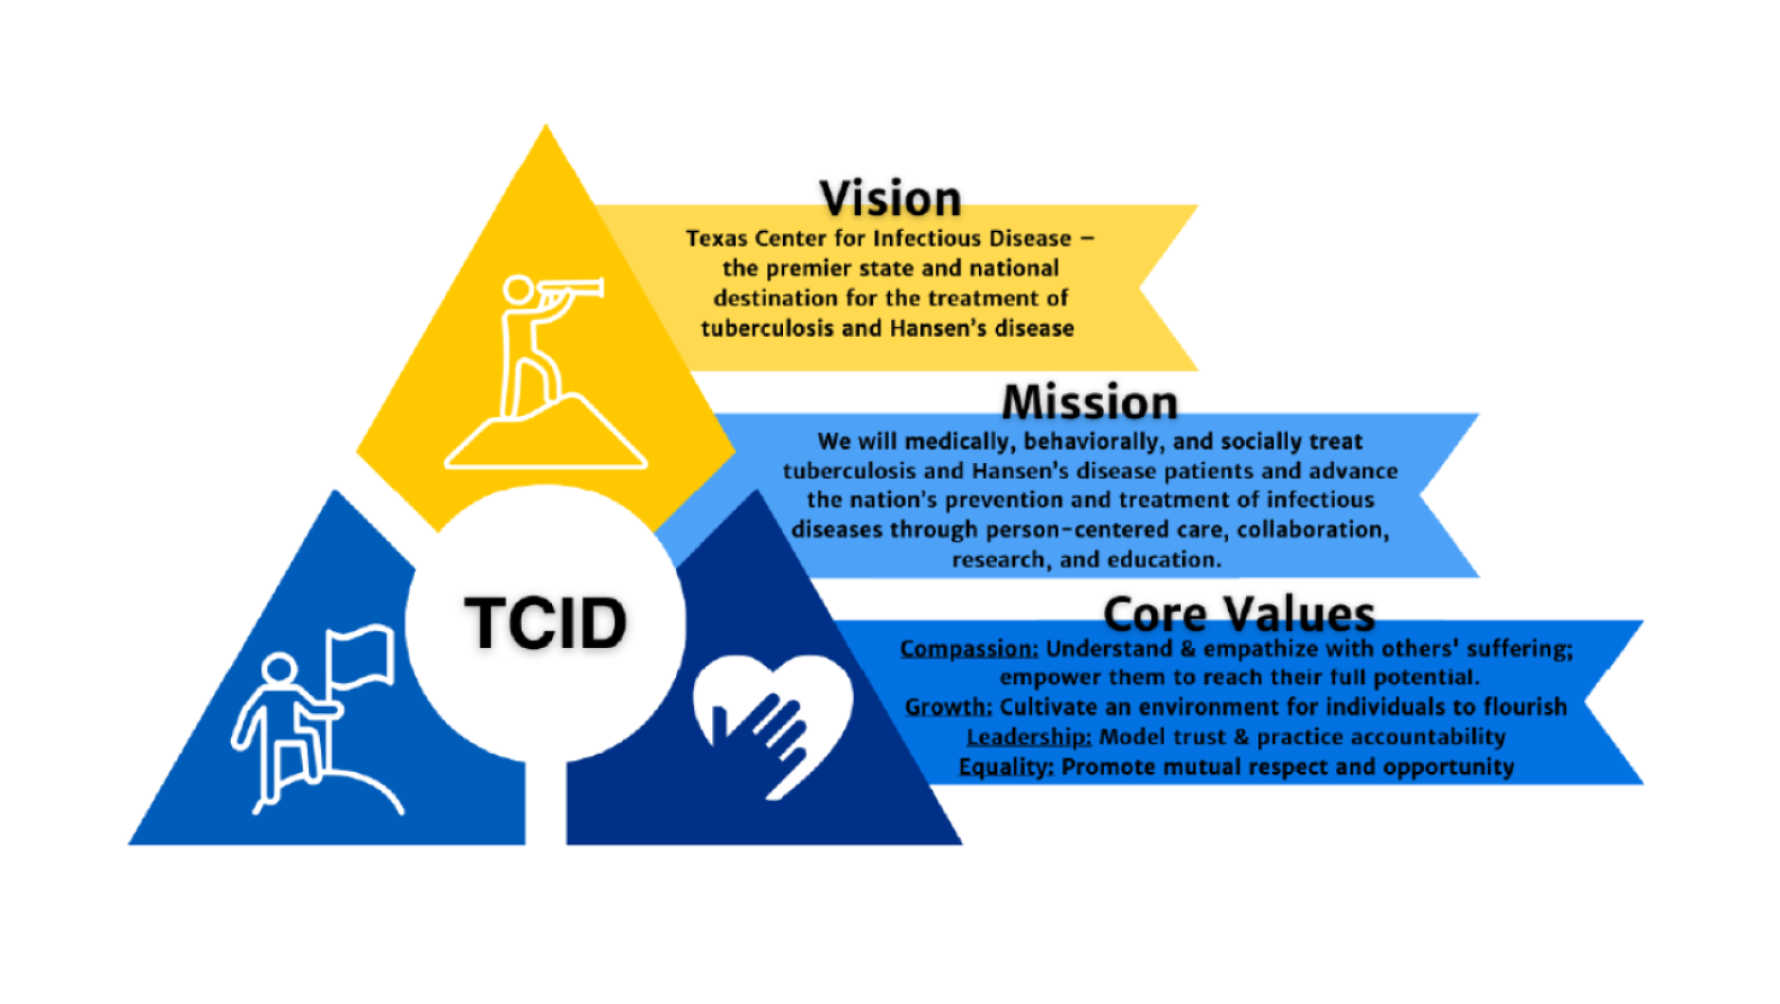 "TCID Vision, Mission, and Core Values "